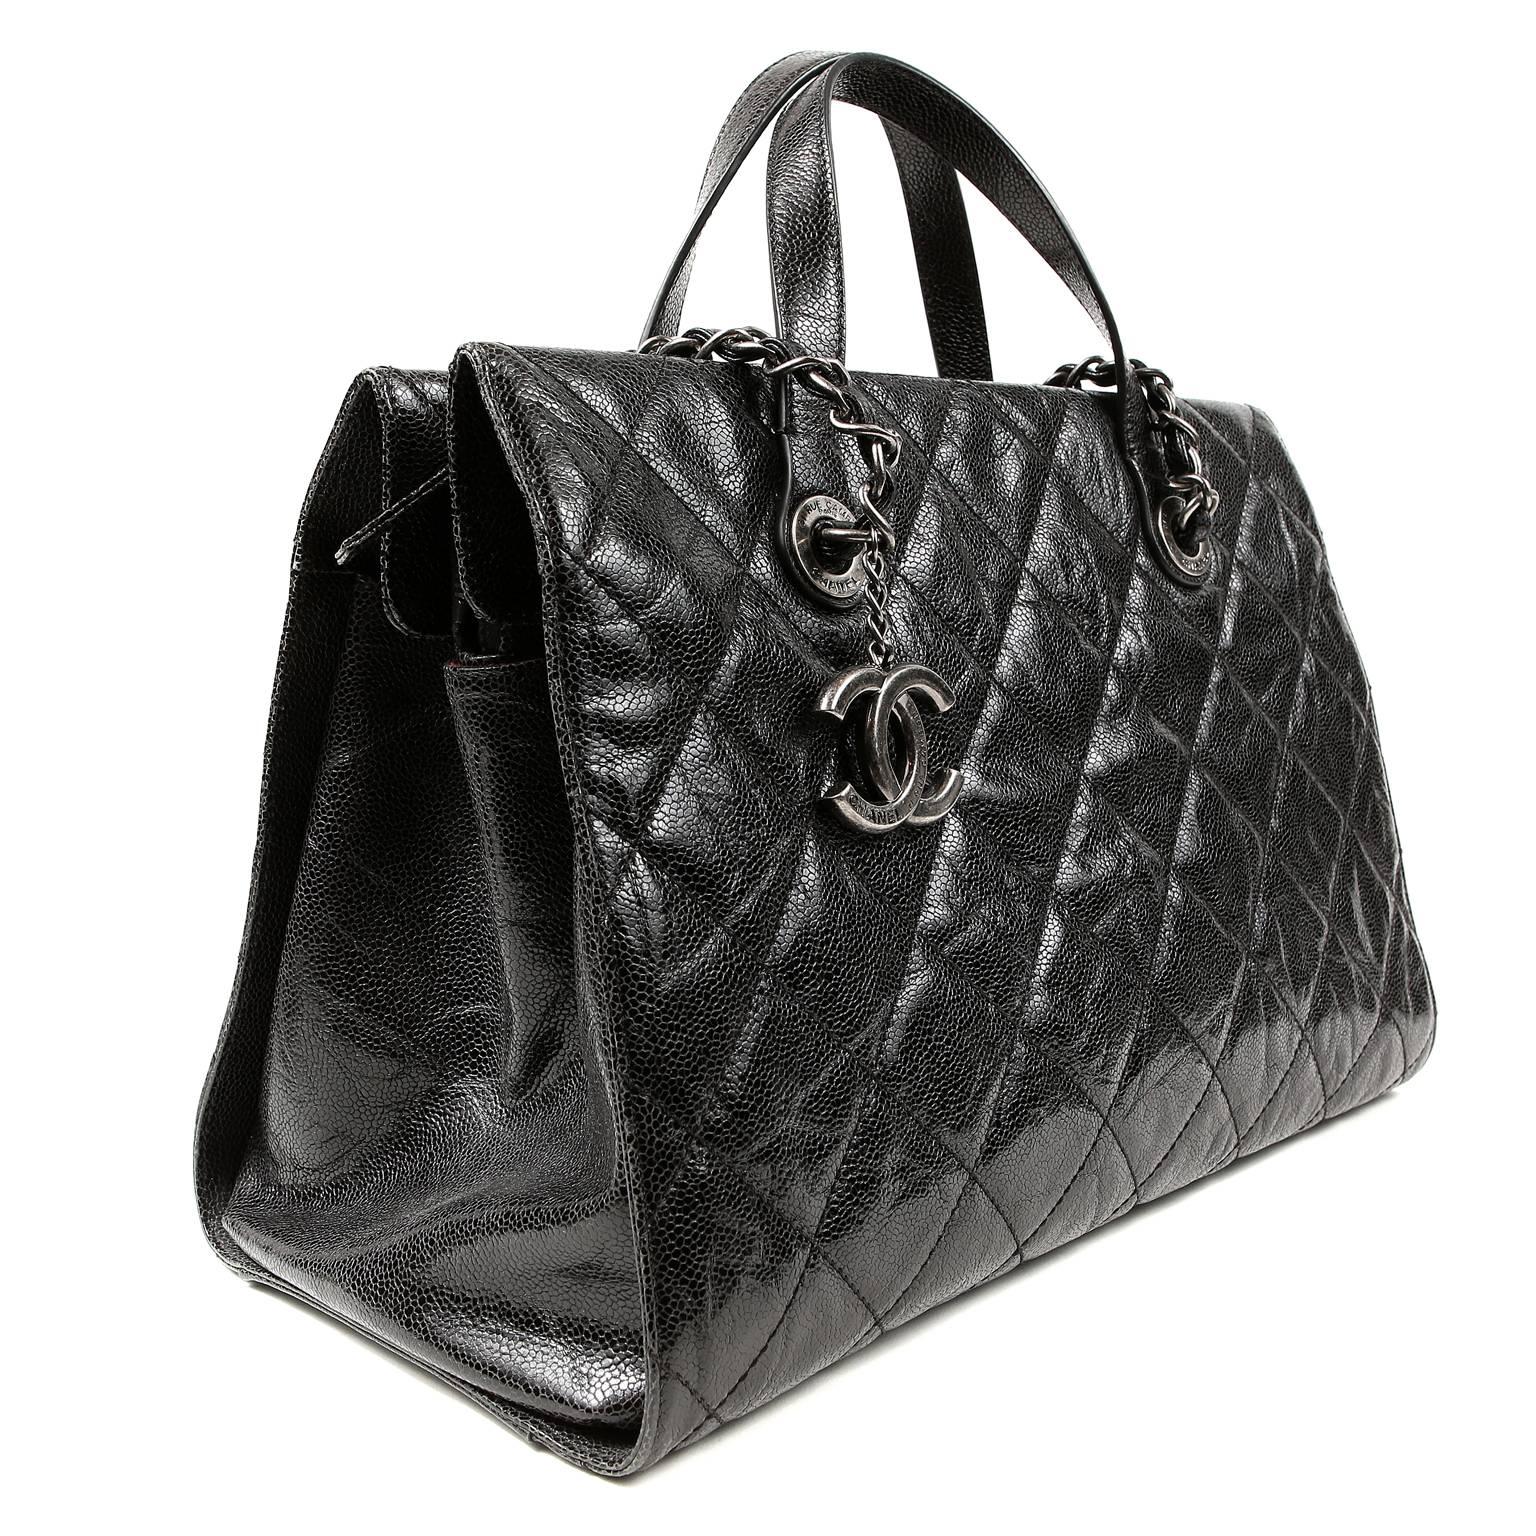 Chanel Black Distressed Caviar Day Bag- Pristine Condition
  Carried as a briefcase or a handbag, this versatile piece offers many options for year-round enjoyment.  

Black glazed caviar leather has a distressed finish and is quilted in signature